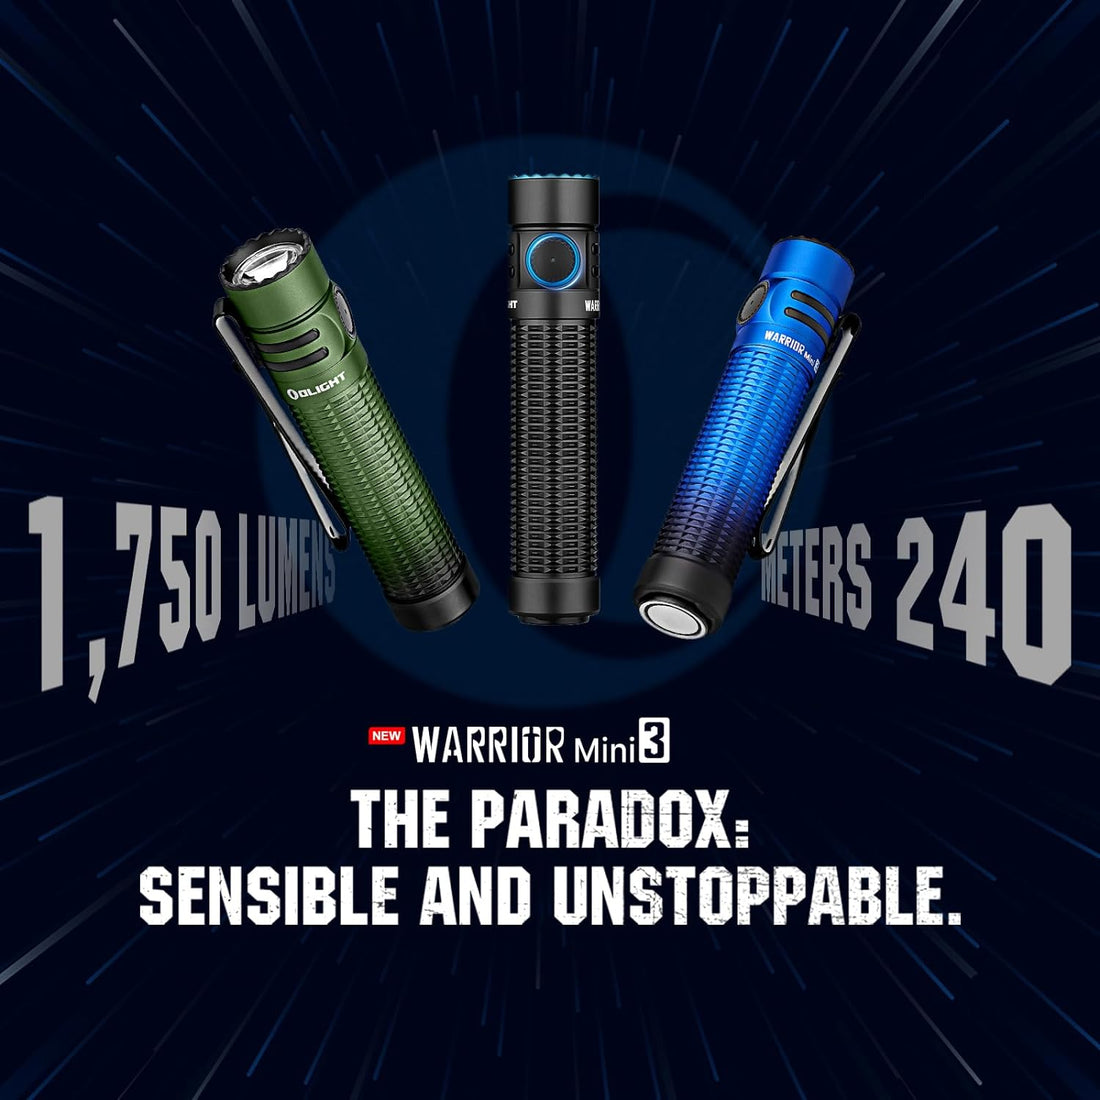 OLIGHT Warrior Mini3 1750 Lumens Rechargeable Tactical Flashlight with Dual Switch and Proximity Sensor, LED Flashlight for EDC, Outdoor, Camping and Emergency (Deep Sea Blue)